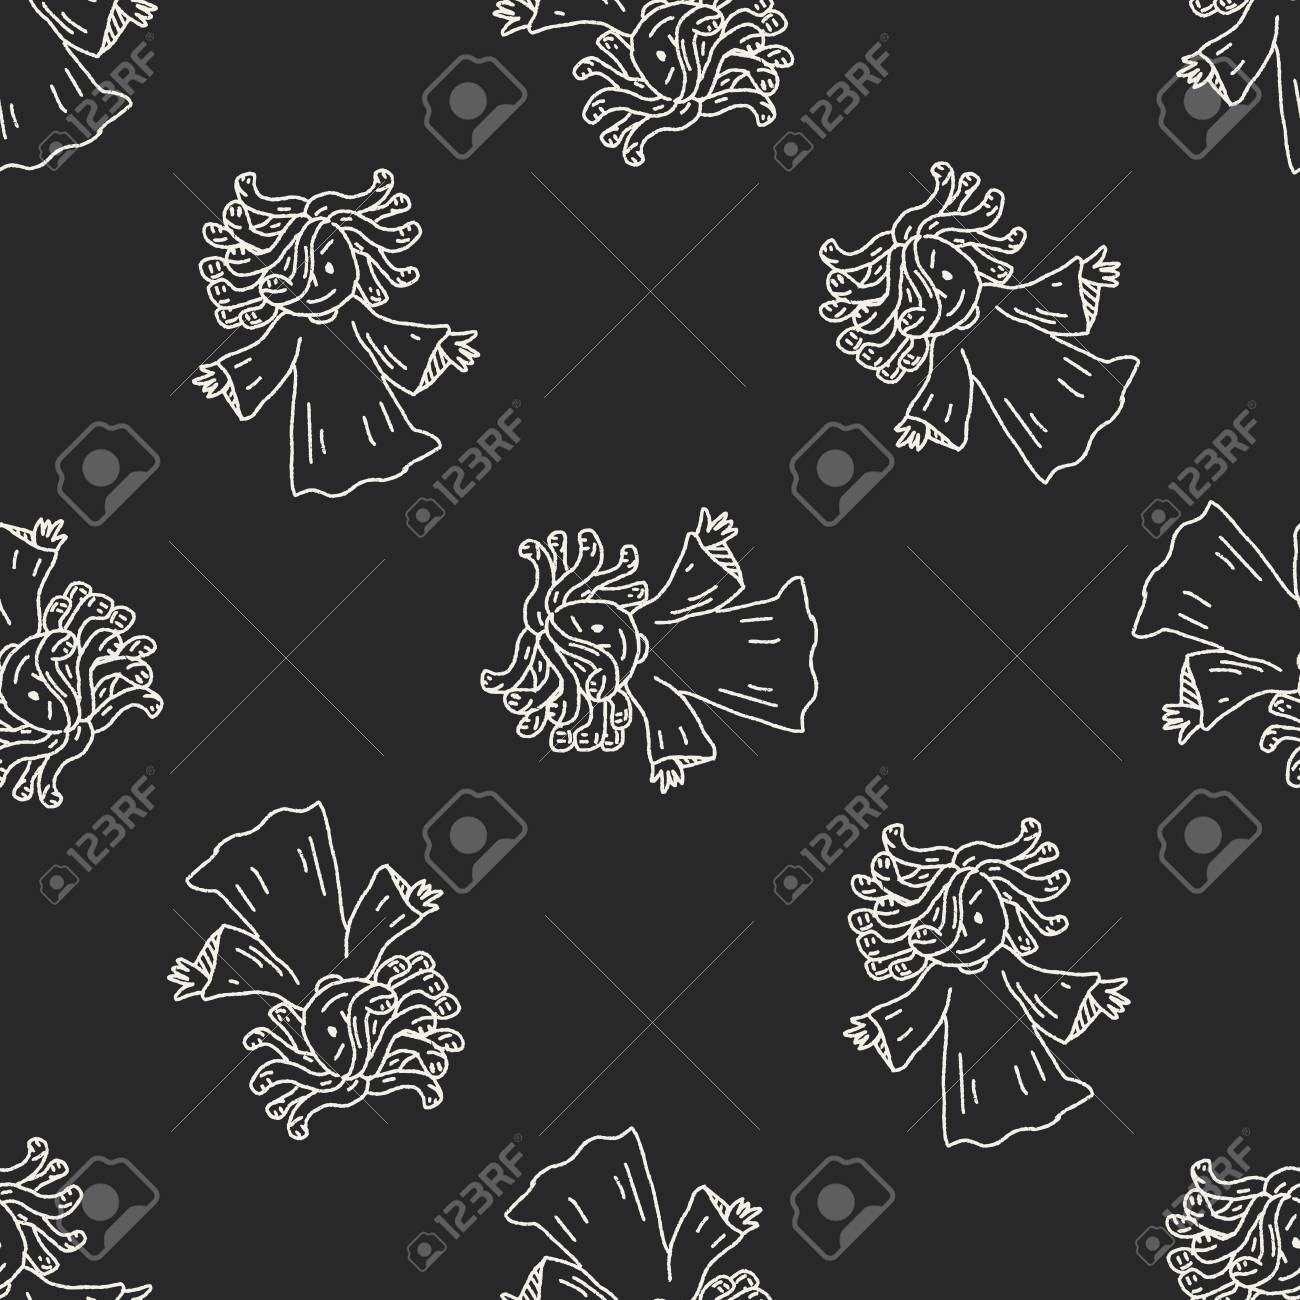 Medusa Doodle Seamless Pattern Background Royalty Free Cliparts